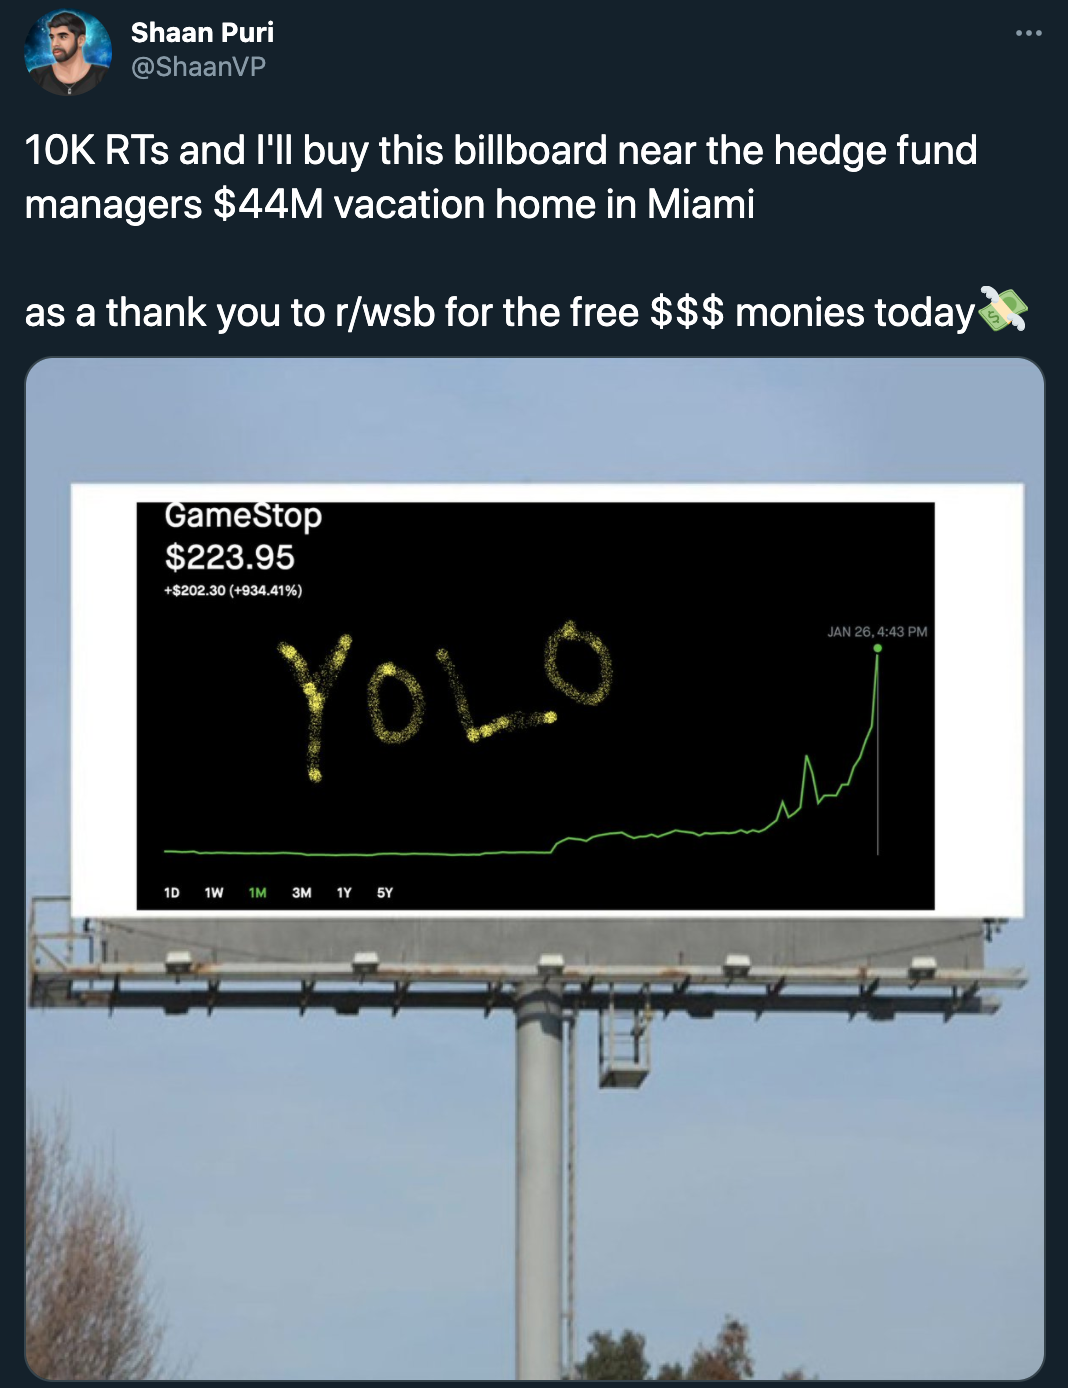 funny gamestop stock jokes - 10K RTs and I'll buy this billboard near the hedge fund managers $44M vacation home in Miami as a thank you to rwsb for the free $$$ monies